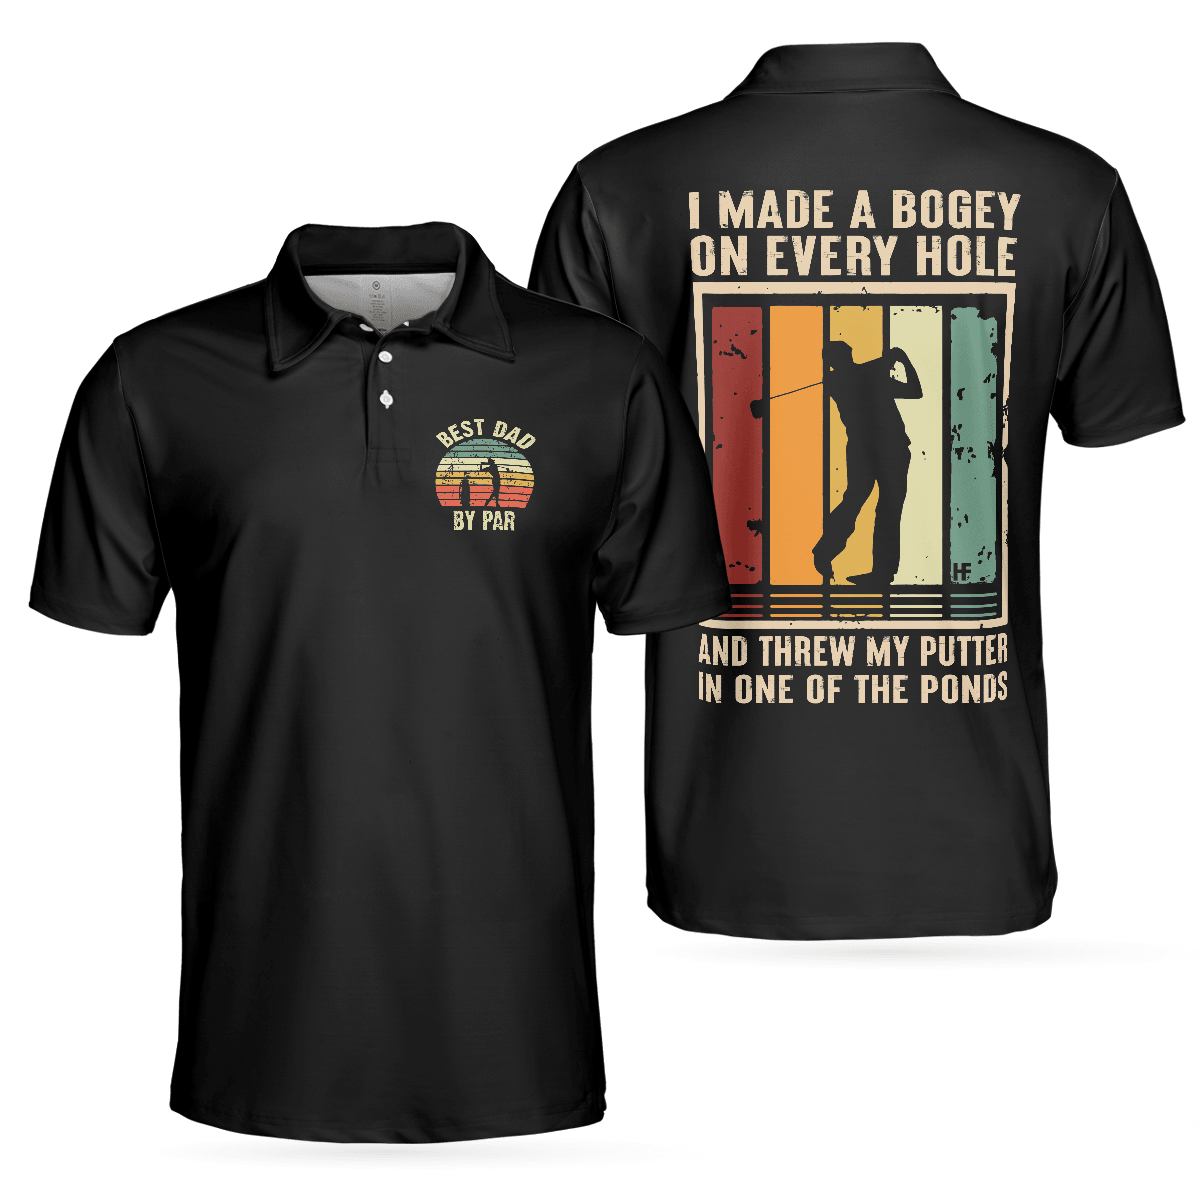 Golf Men Polo Shirt, Golf Best Dad By Par Polo Shirt, Black Golf Shirt With Sayings, Father's Day Gift For Men, Golfers, Golf Lovers - Amzanimalsgift